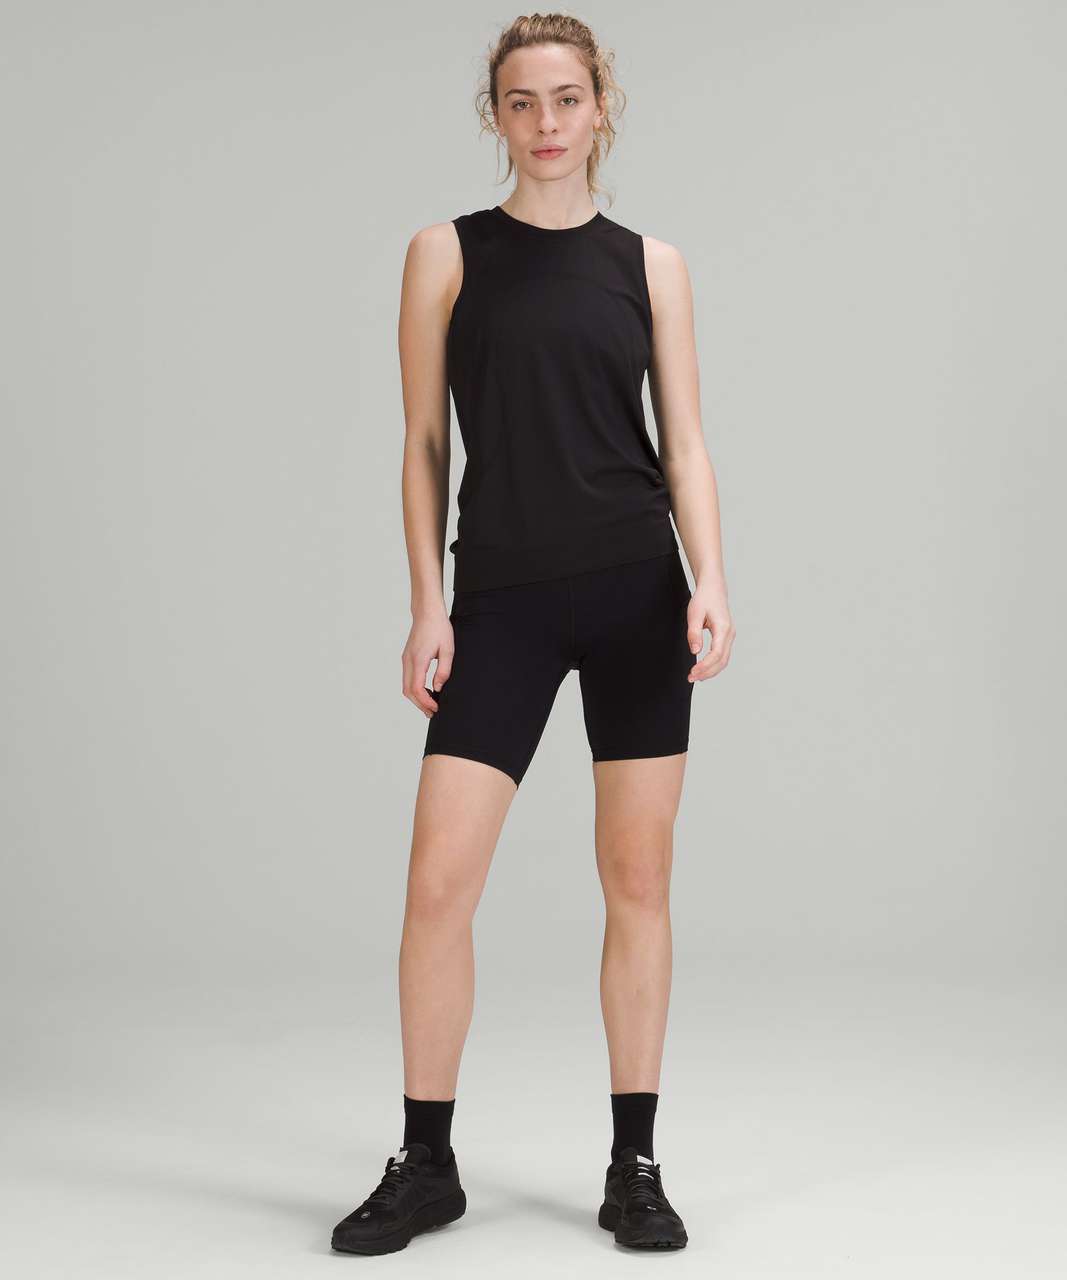 Lululemon Swiftly Relaxed Muscle Tank Top - Black / Black